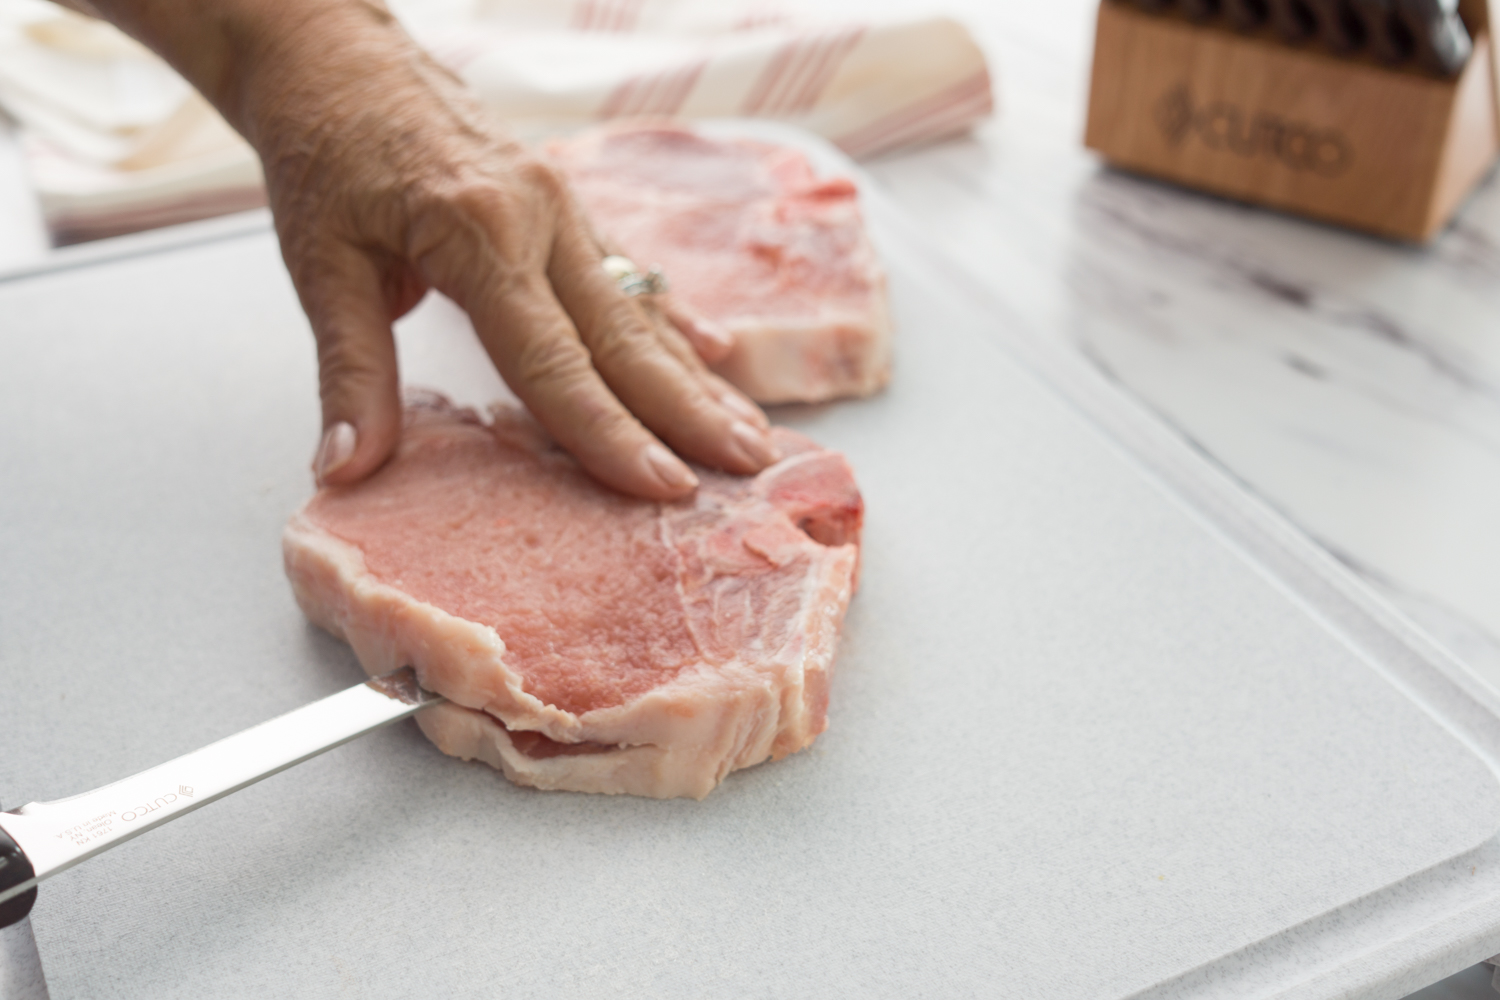 Slicing the pork chops with a Boning Knife.